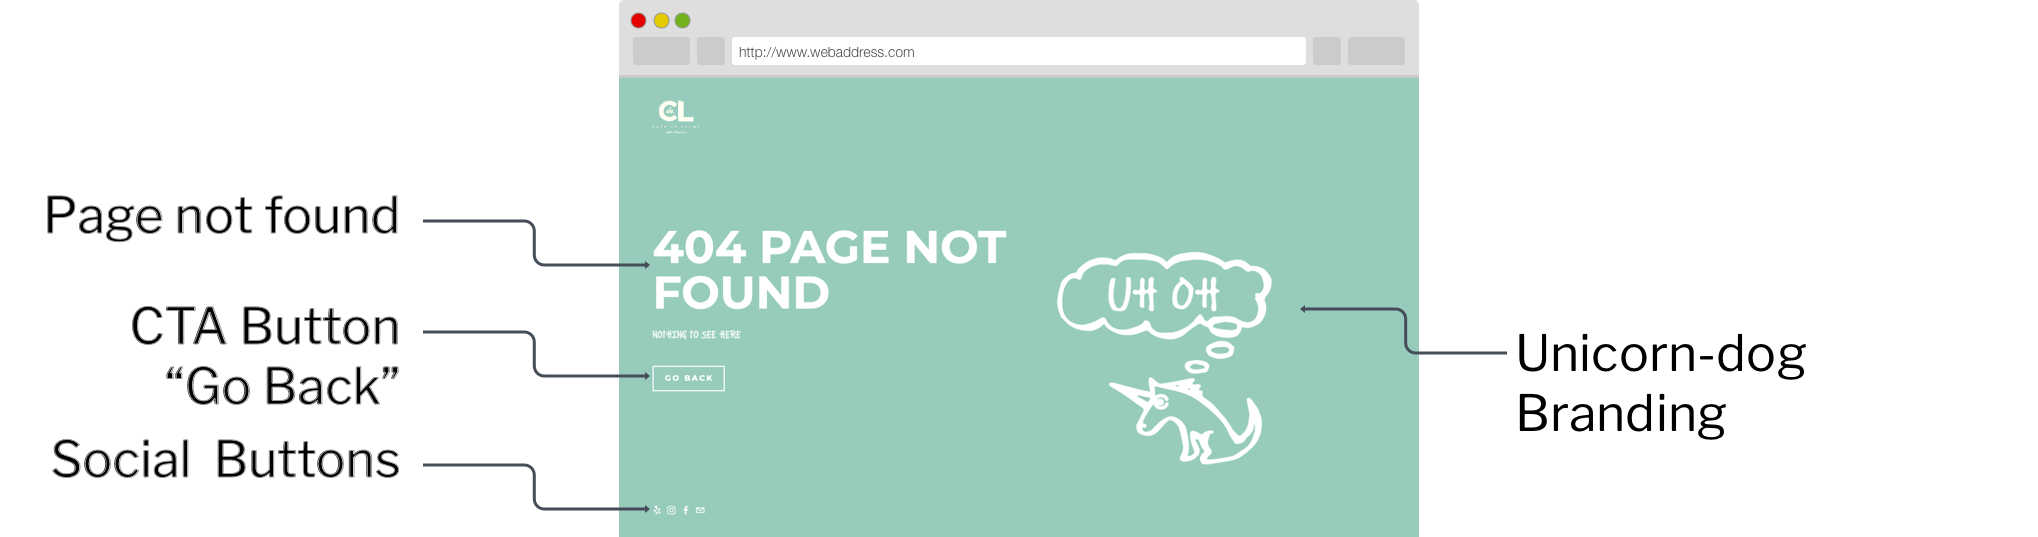 404page2.png